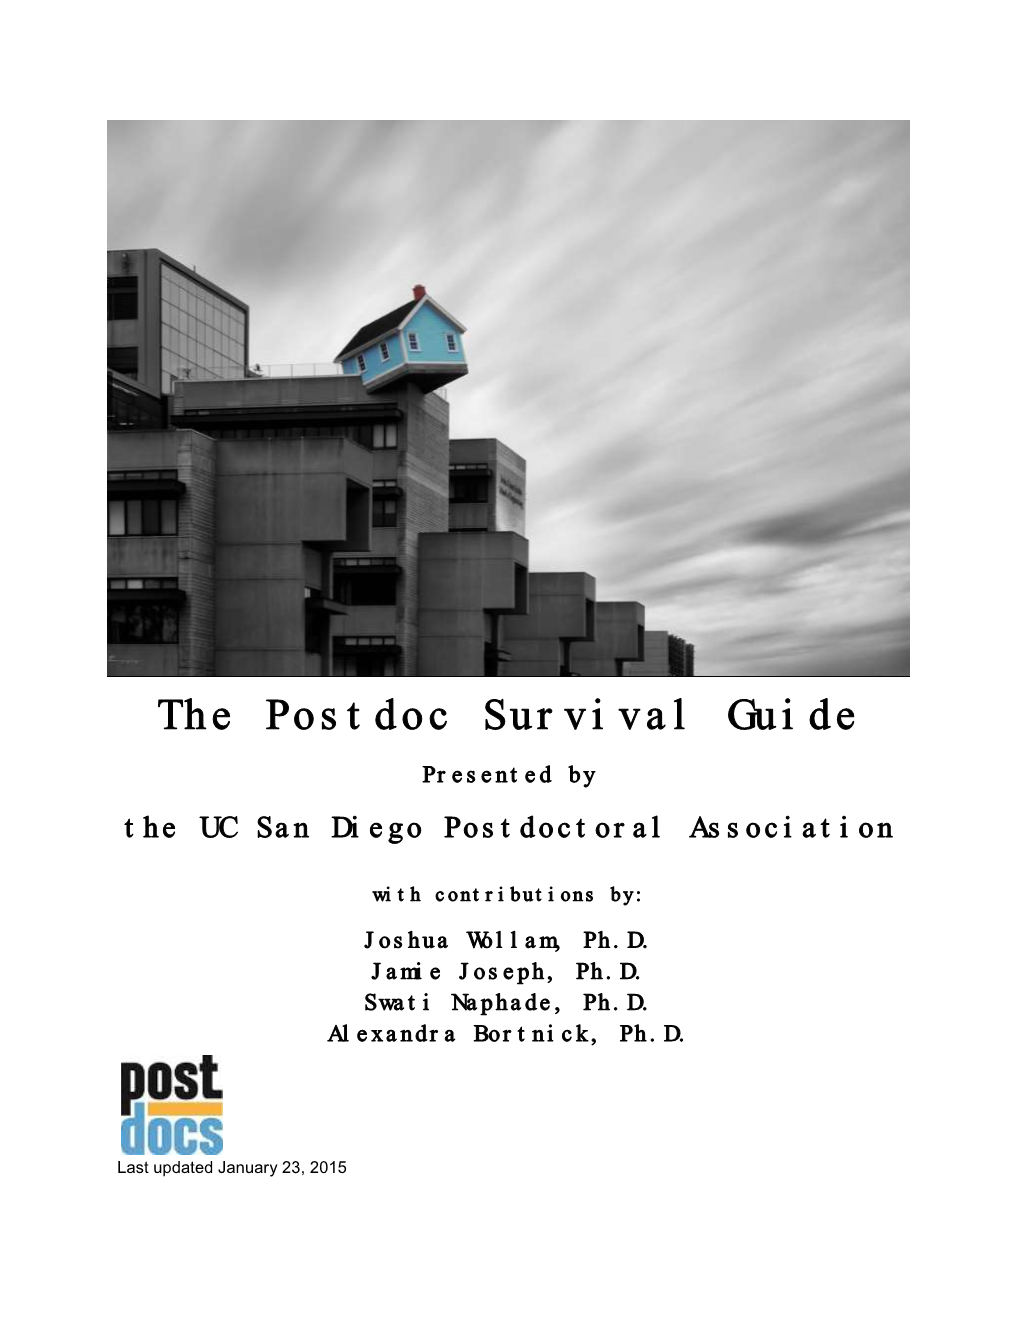 The Postdoc Survival Guide Presented by the UC San Diego Postdoctoral Association